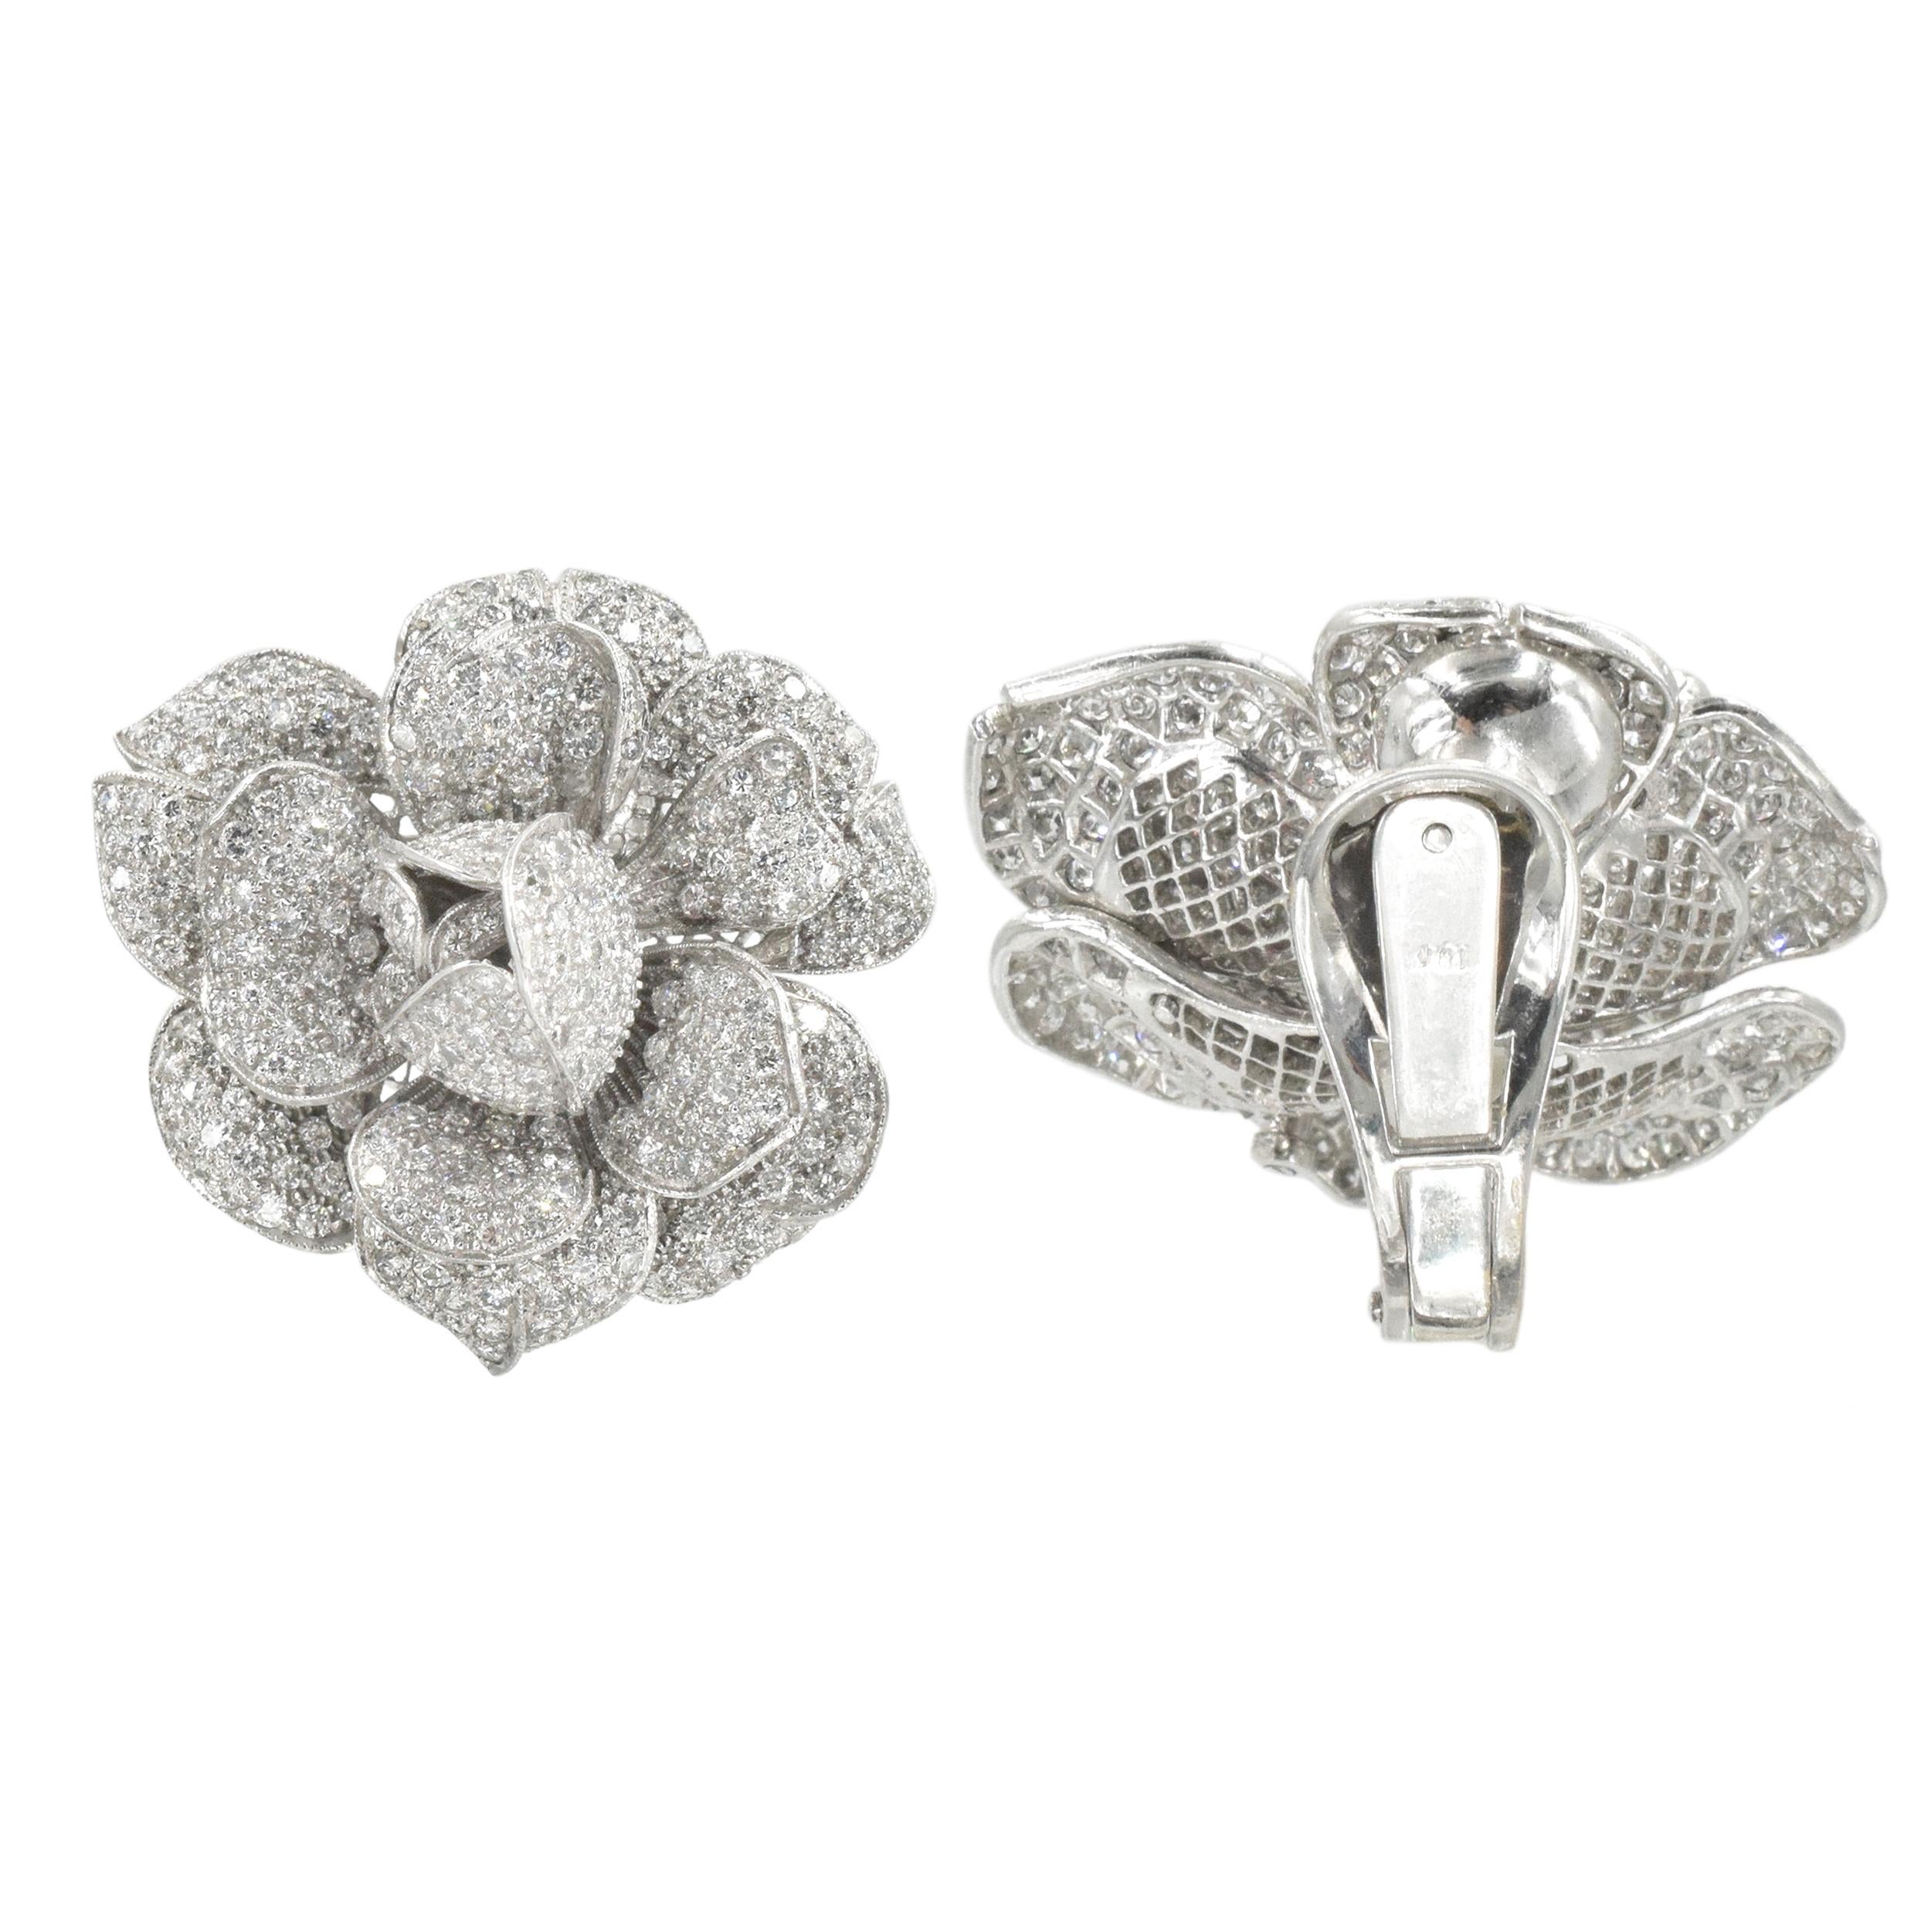 Diamond Flower Earrings in Platinum and 18k White Gold In Excellent Condition For Sale In New York, NY